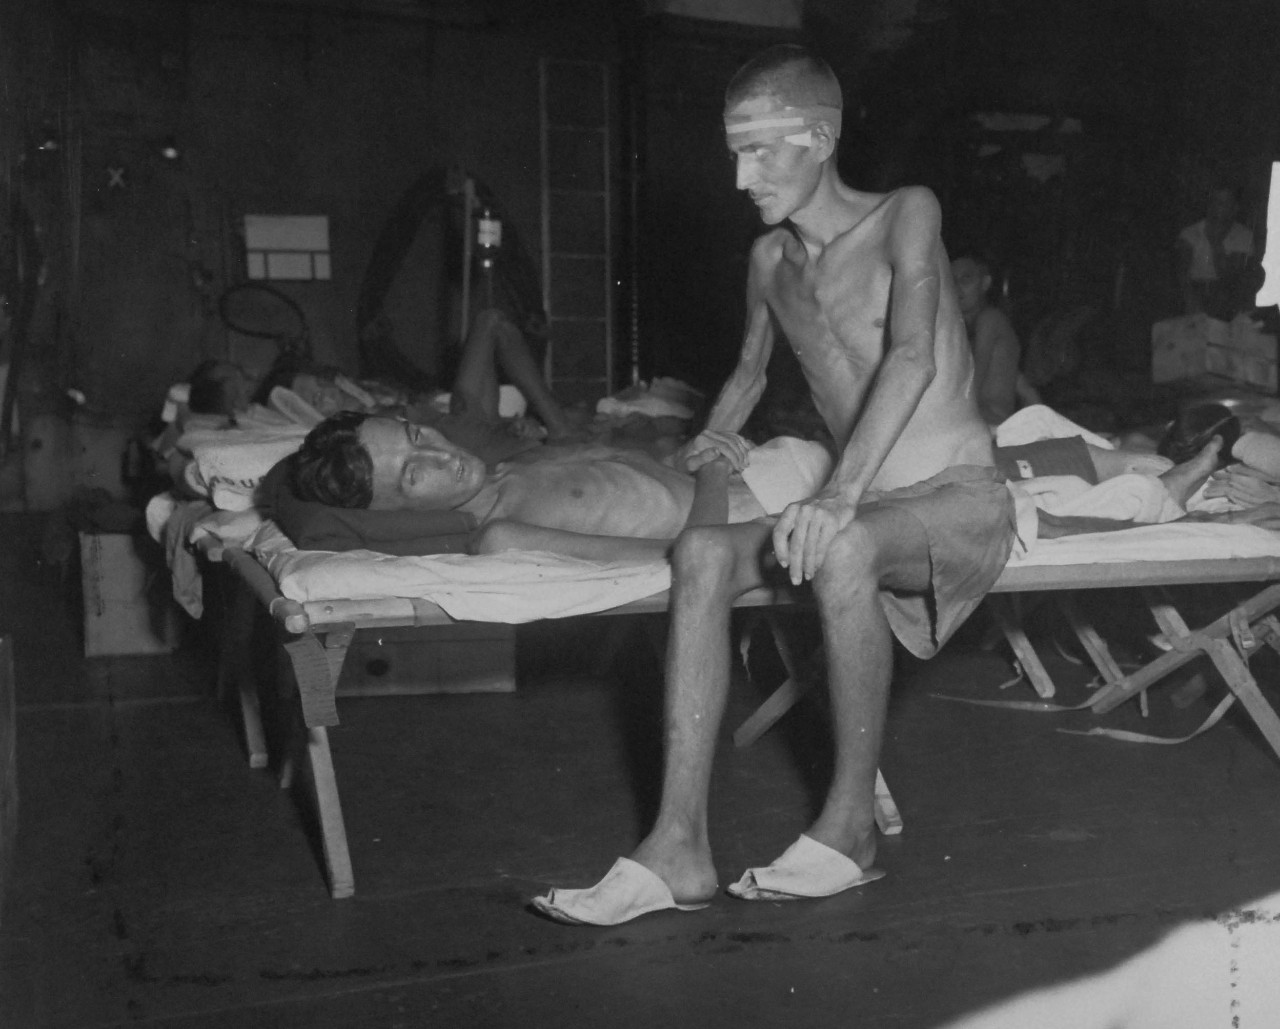 80-G-490492-A:   Allied Prisoners of War, Formosa, 1945.   CP1 Gordon James Clark and Gunner R.A. Norman Hill, from England, are walking skeletons as they relaxed at last on the hangar deck of USS Block Island (CVE 106), which liberated them from Formosa.  These men were captured at Singapore.   Photograph released September 5, 1945.  Official U.S. Navy photograph, now in the collections of the National Archives.  (2014/05/29).    The original is a small photograph.   